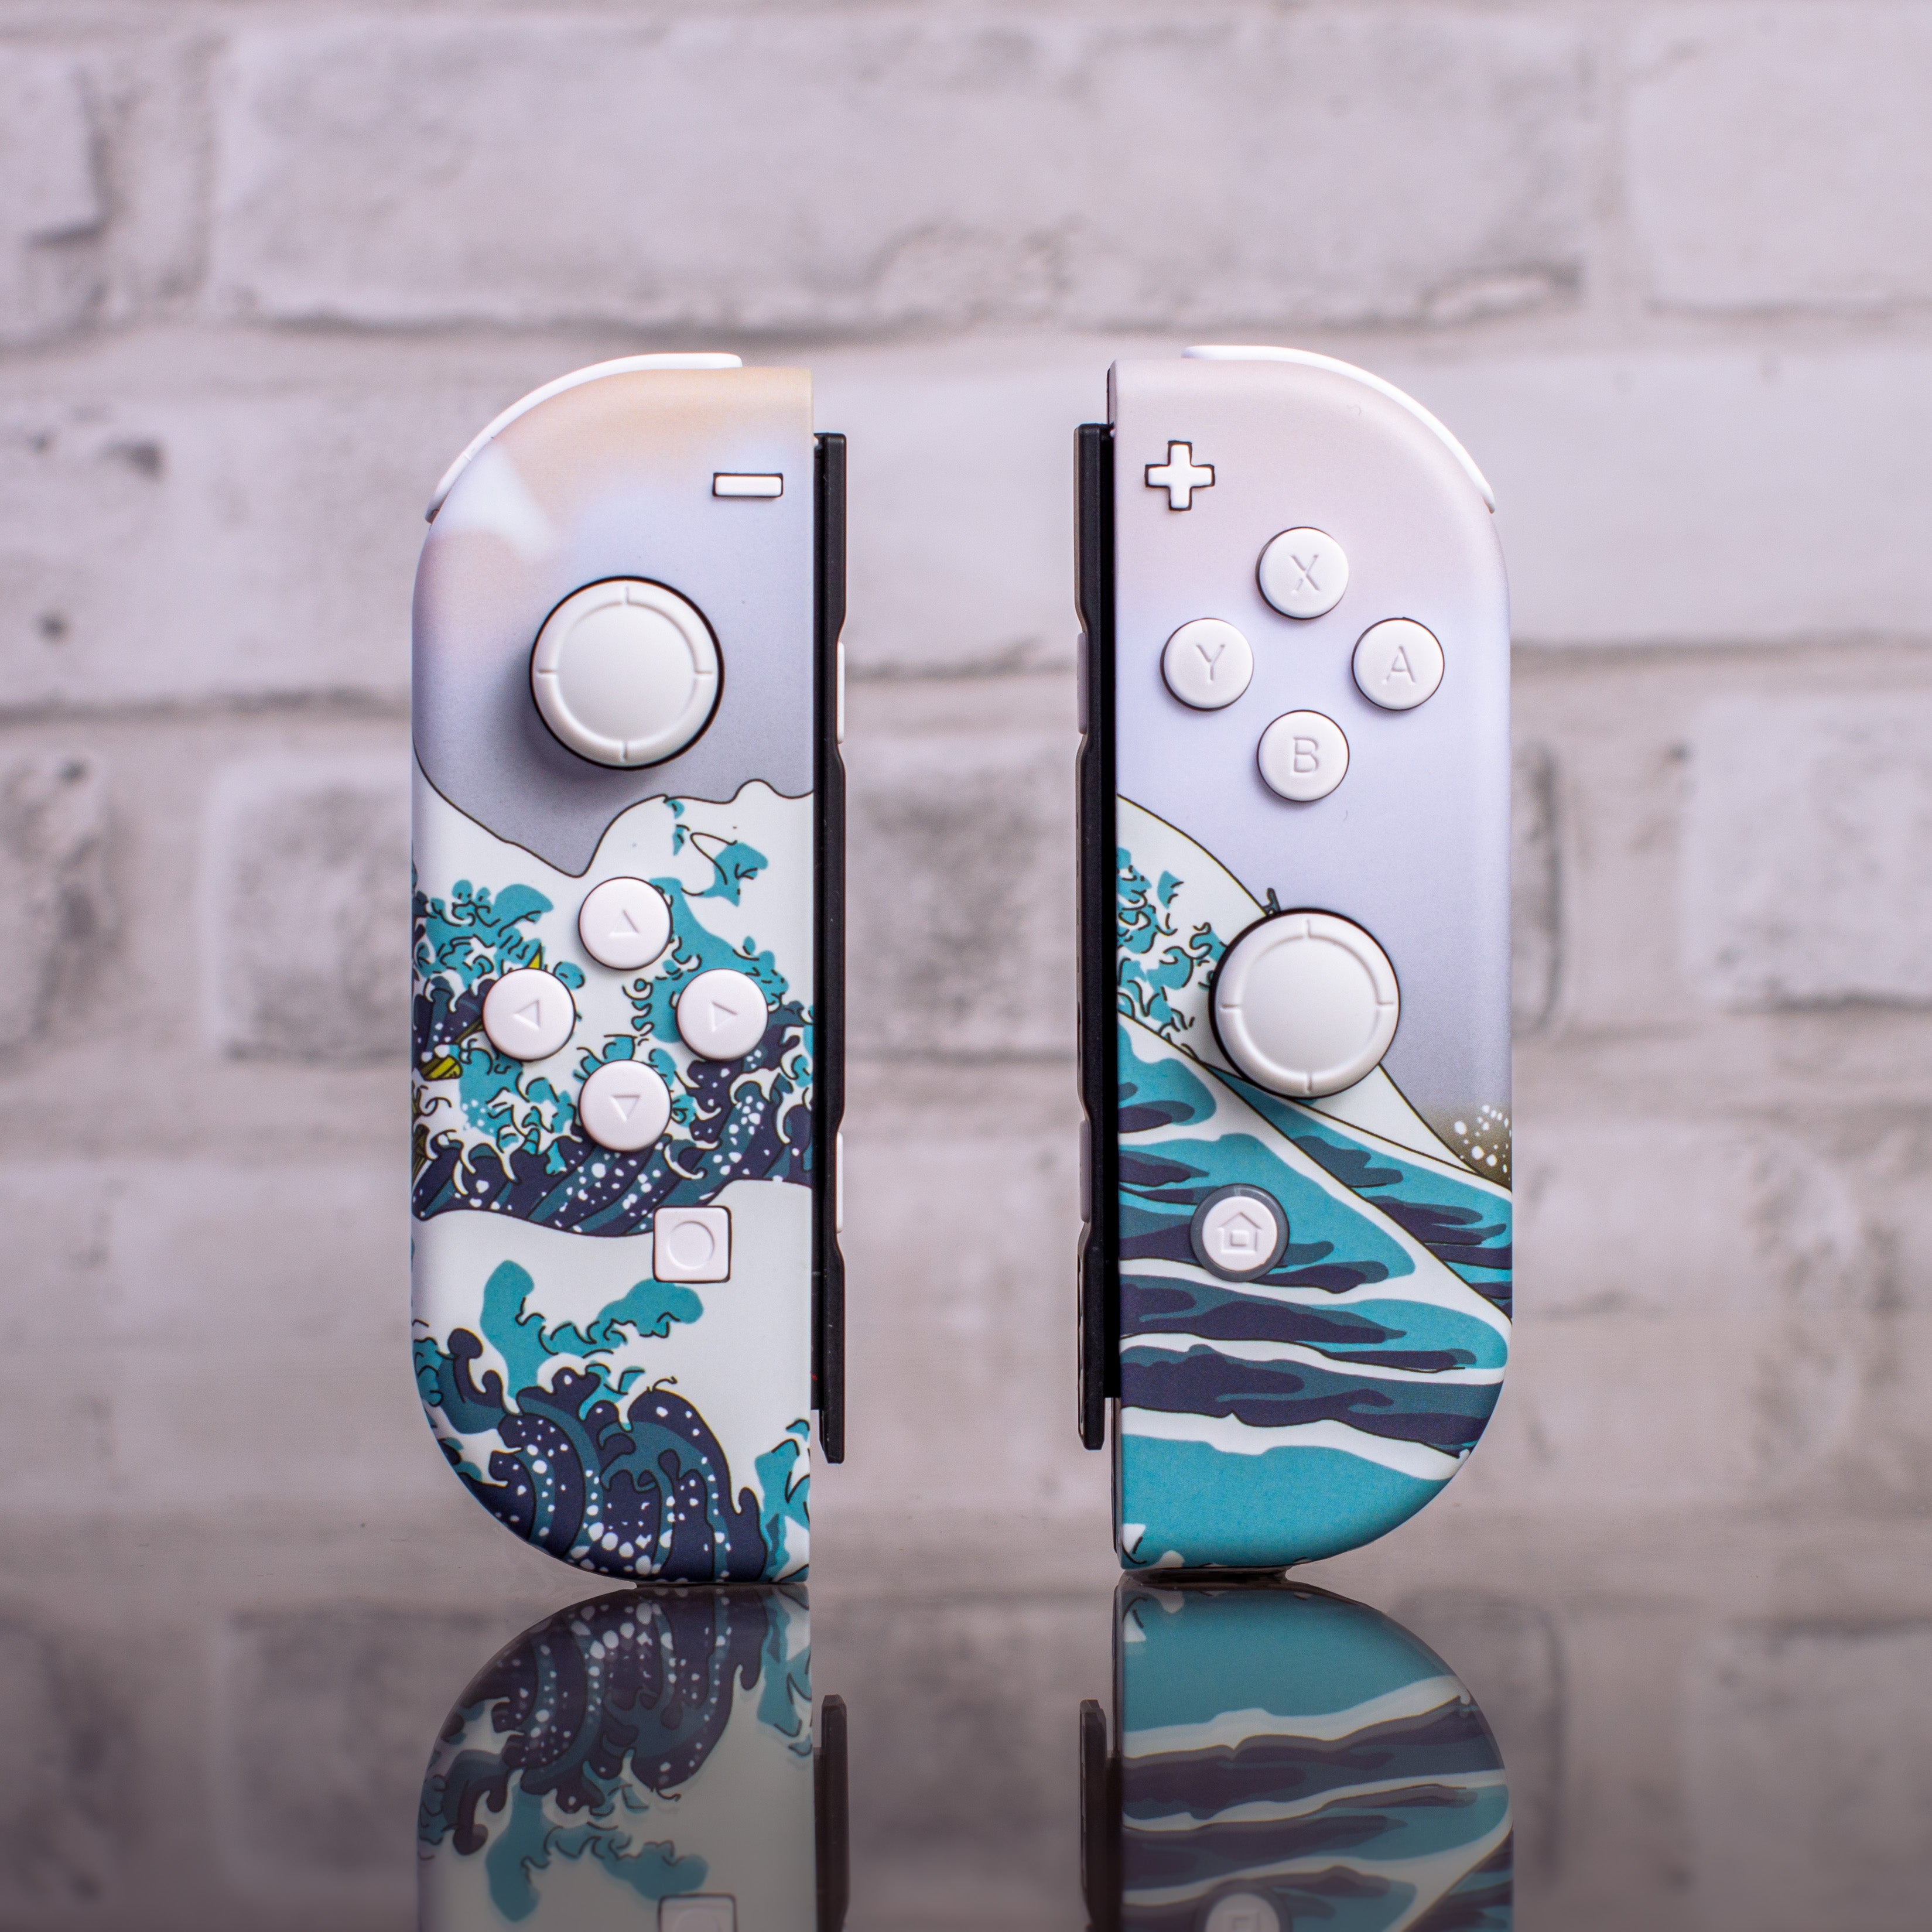 NEW Create Your Own Custom Joy-cons Design Your Own Controllers